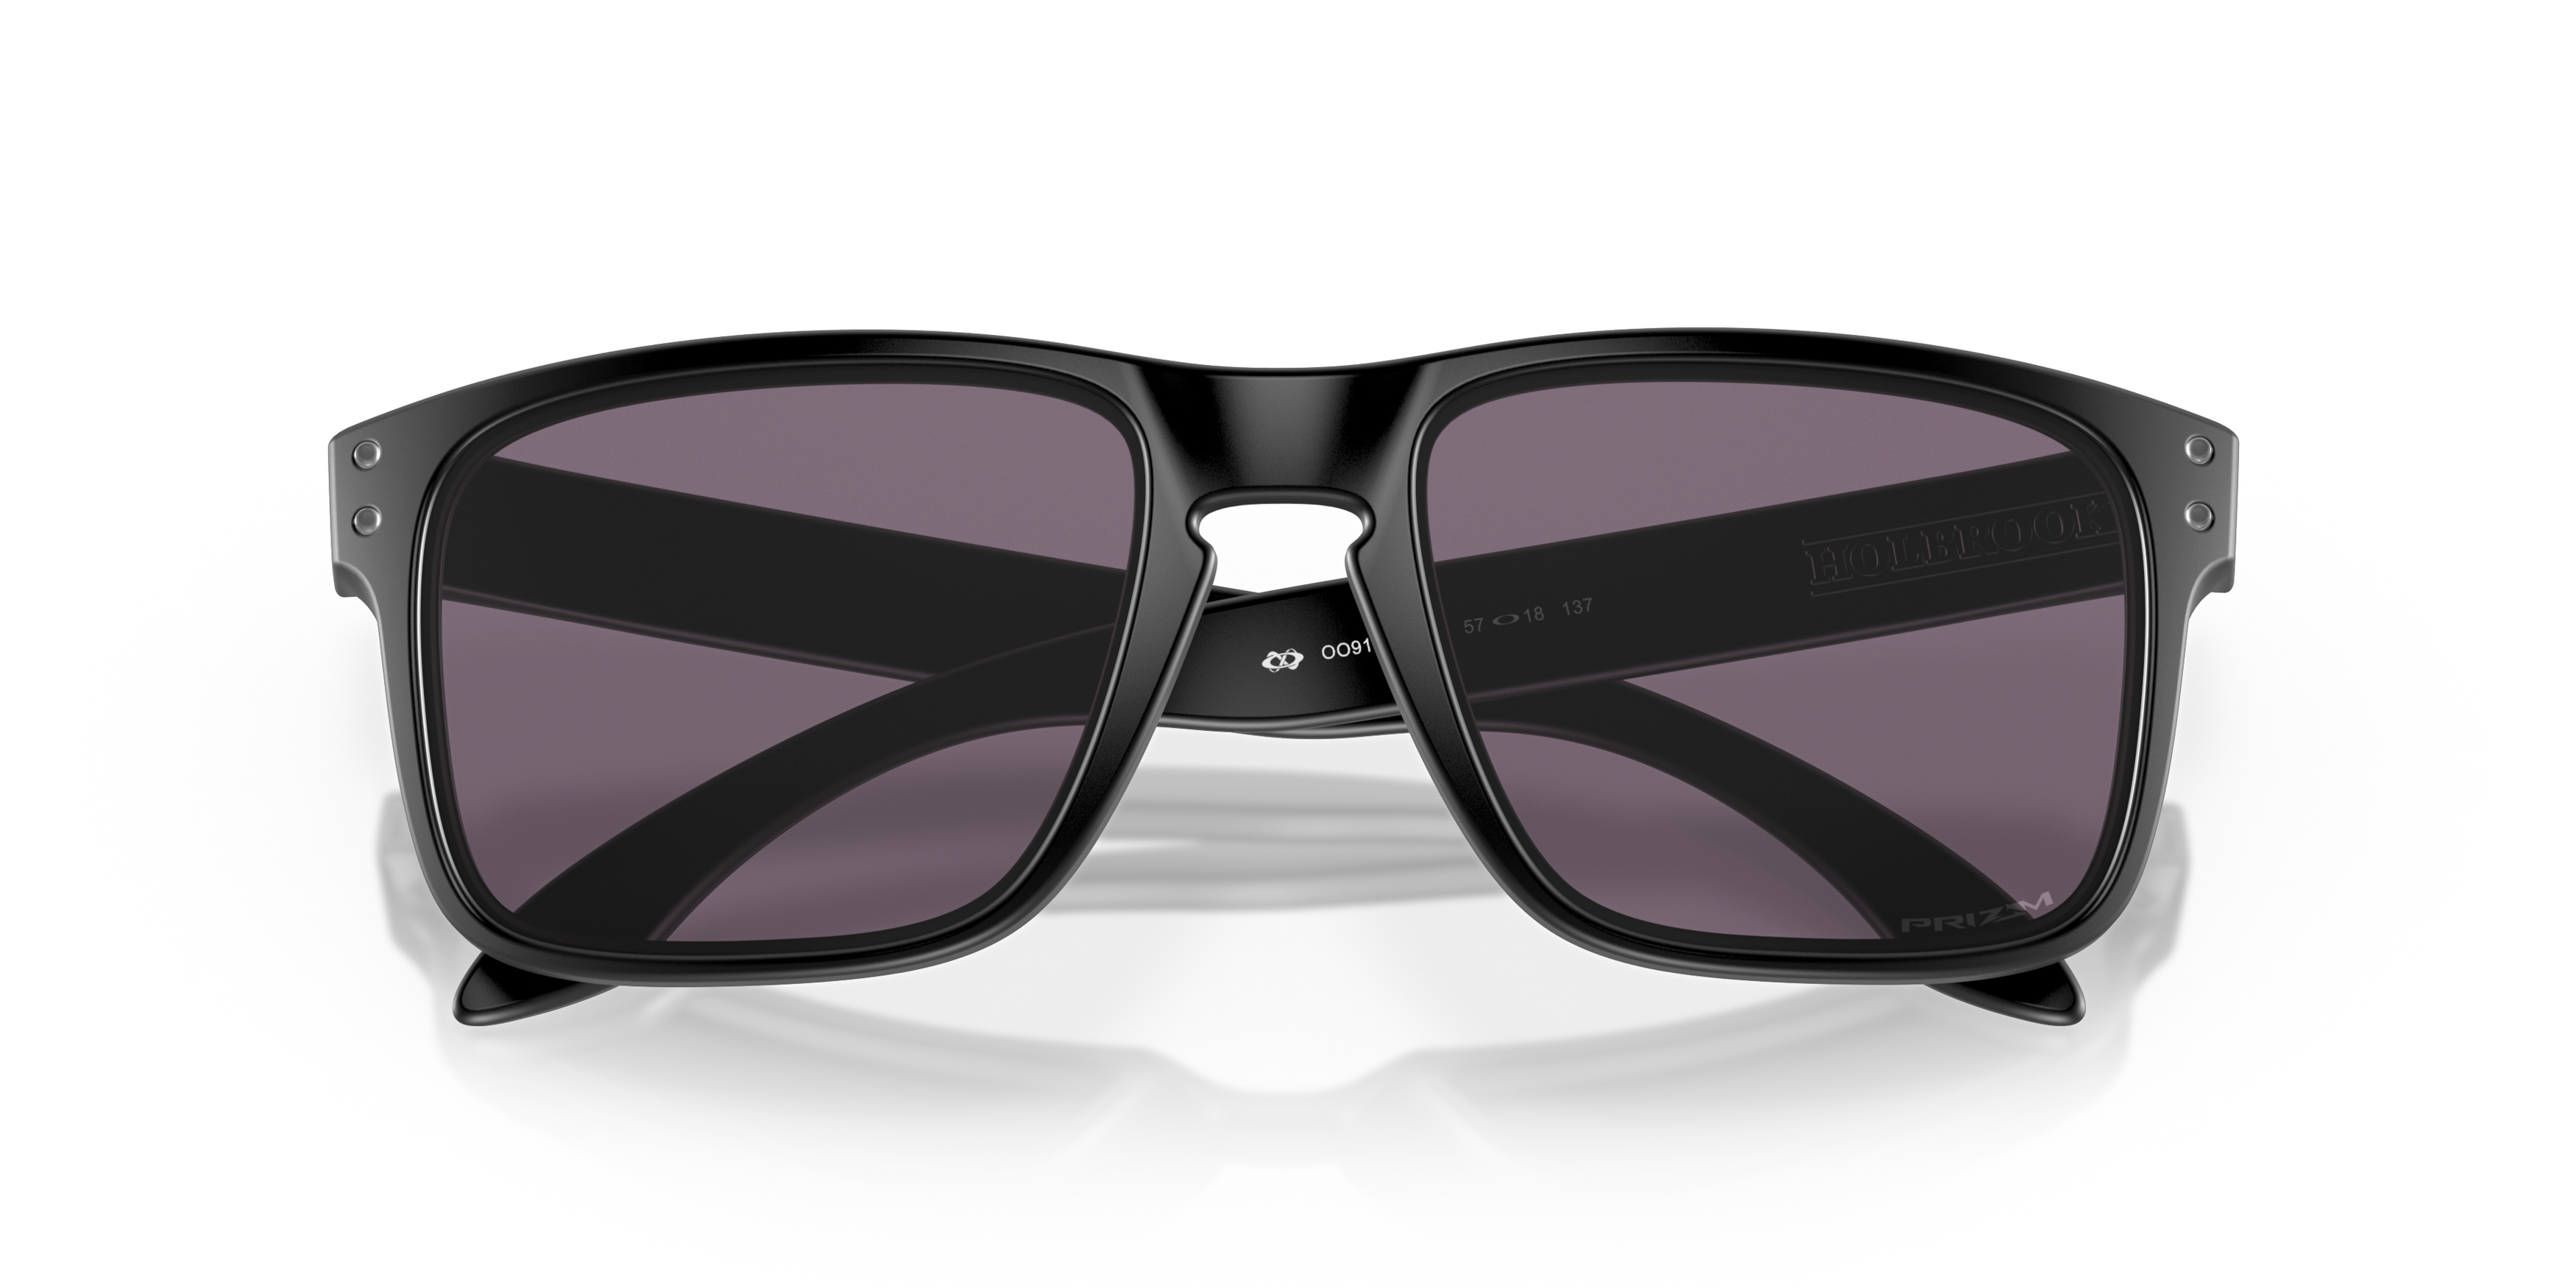 [products.image.folded] Oakley 0OO9102 910000000000